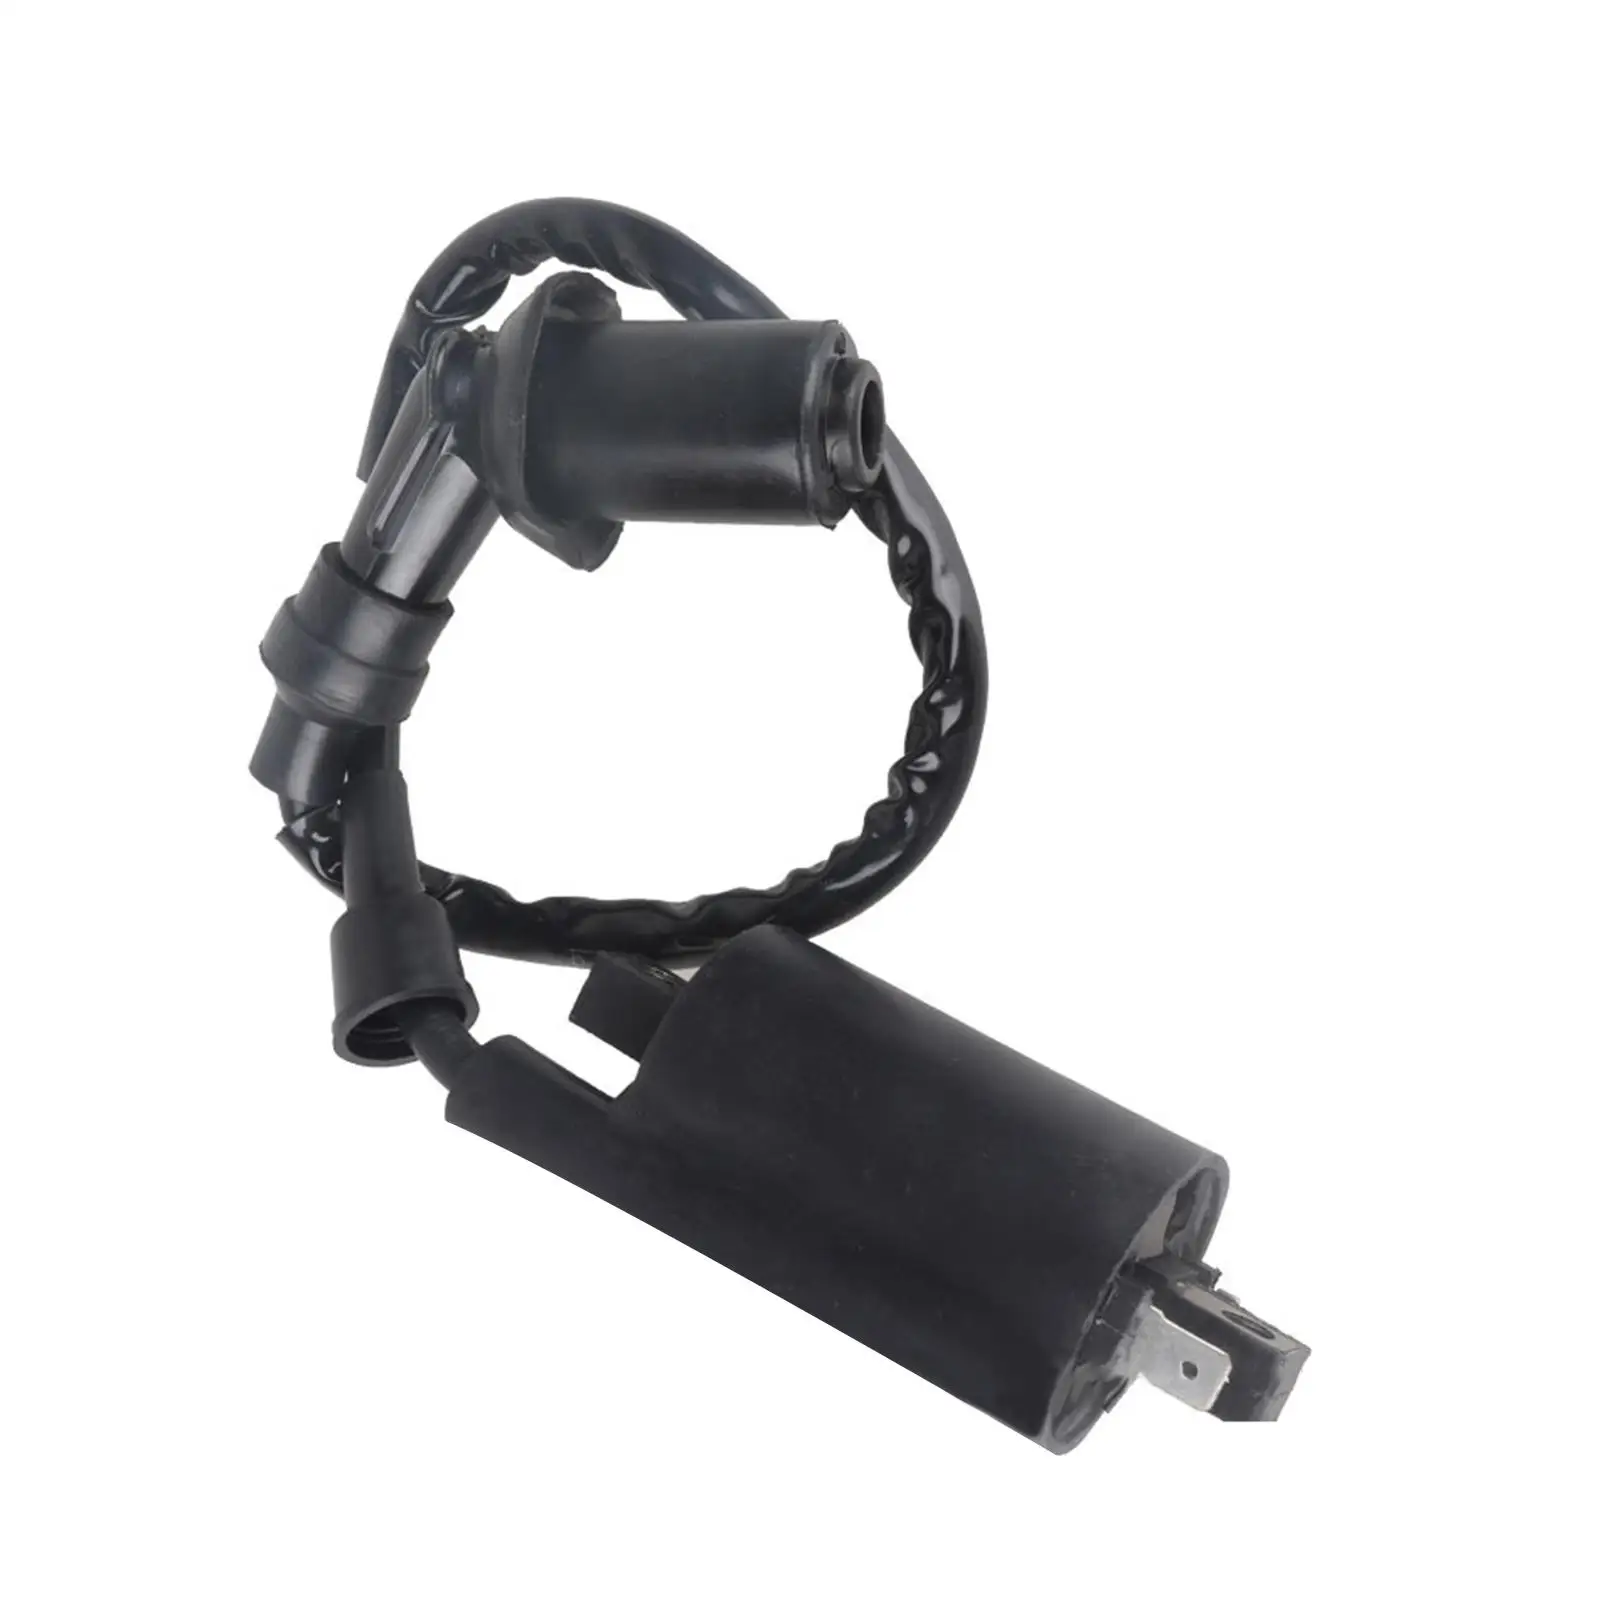 Ignition Coil Parts Replacement Performance Power Enhance Motorbike Accessories Electronic Component for XV250 1995-2007